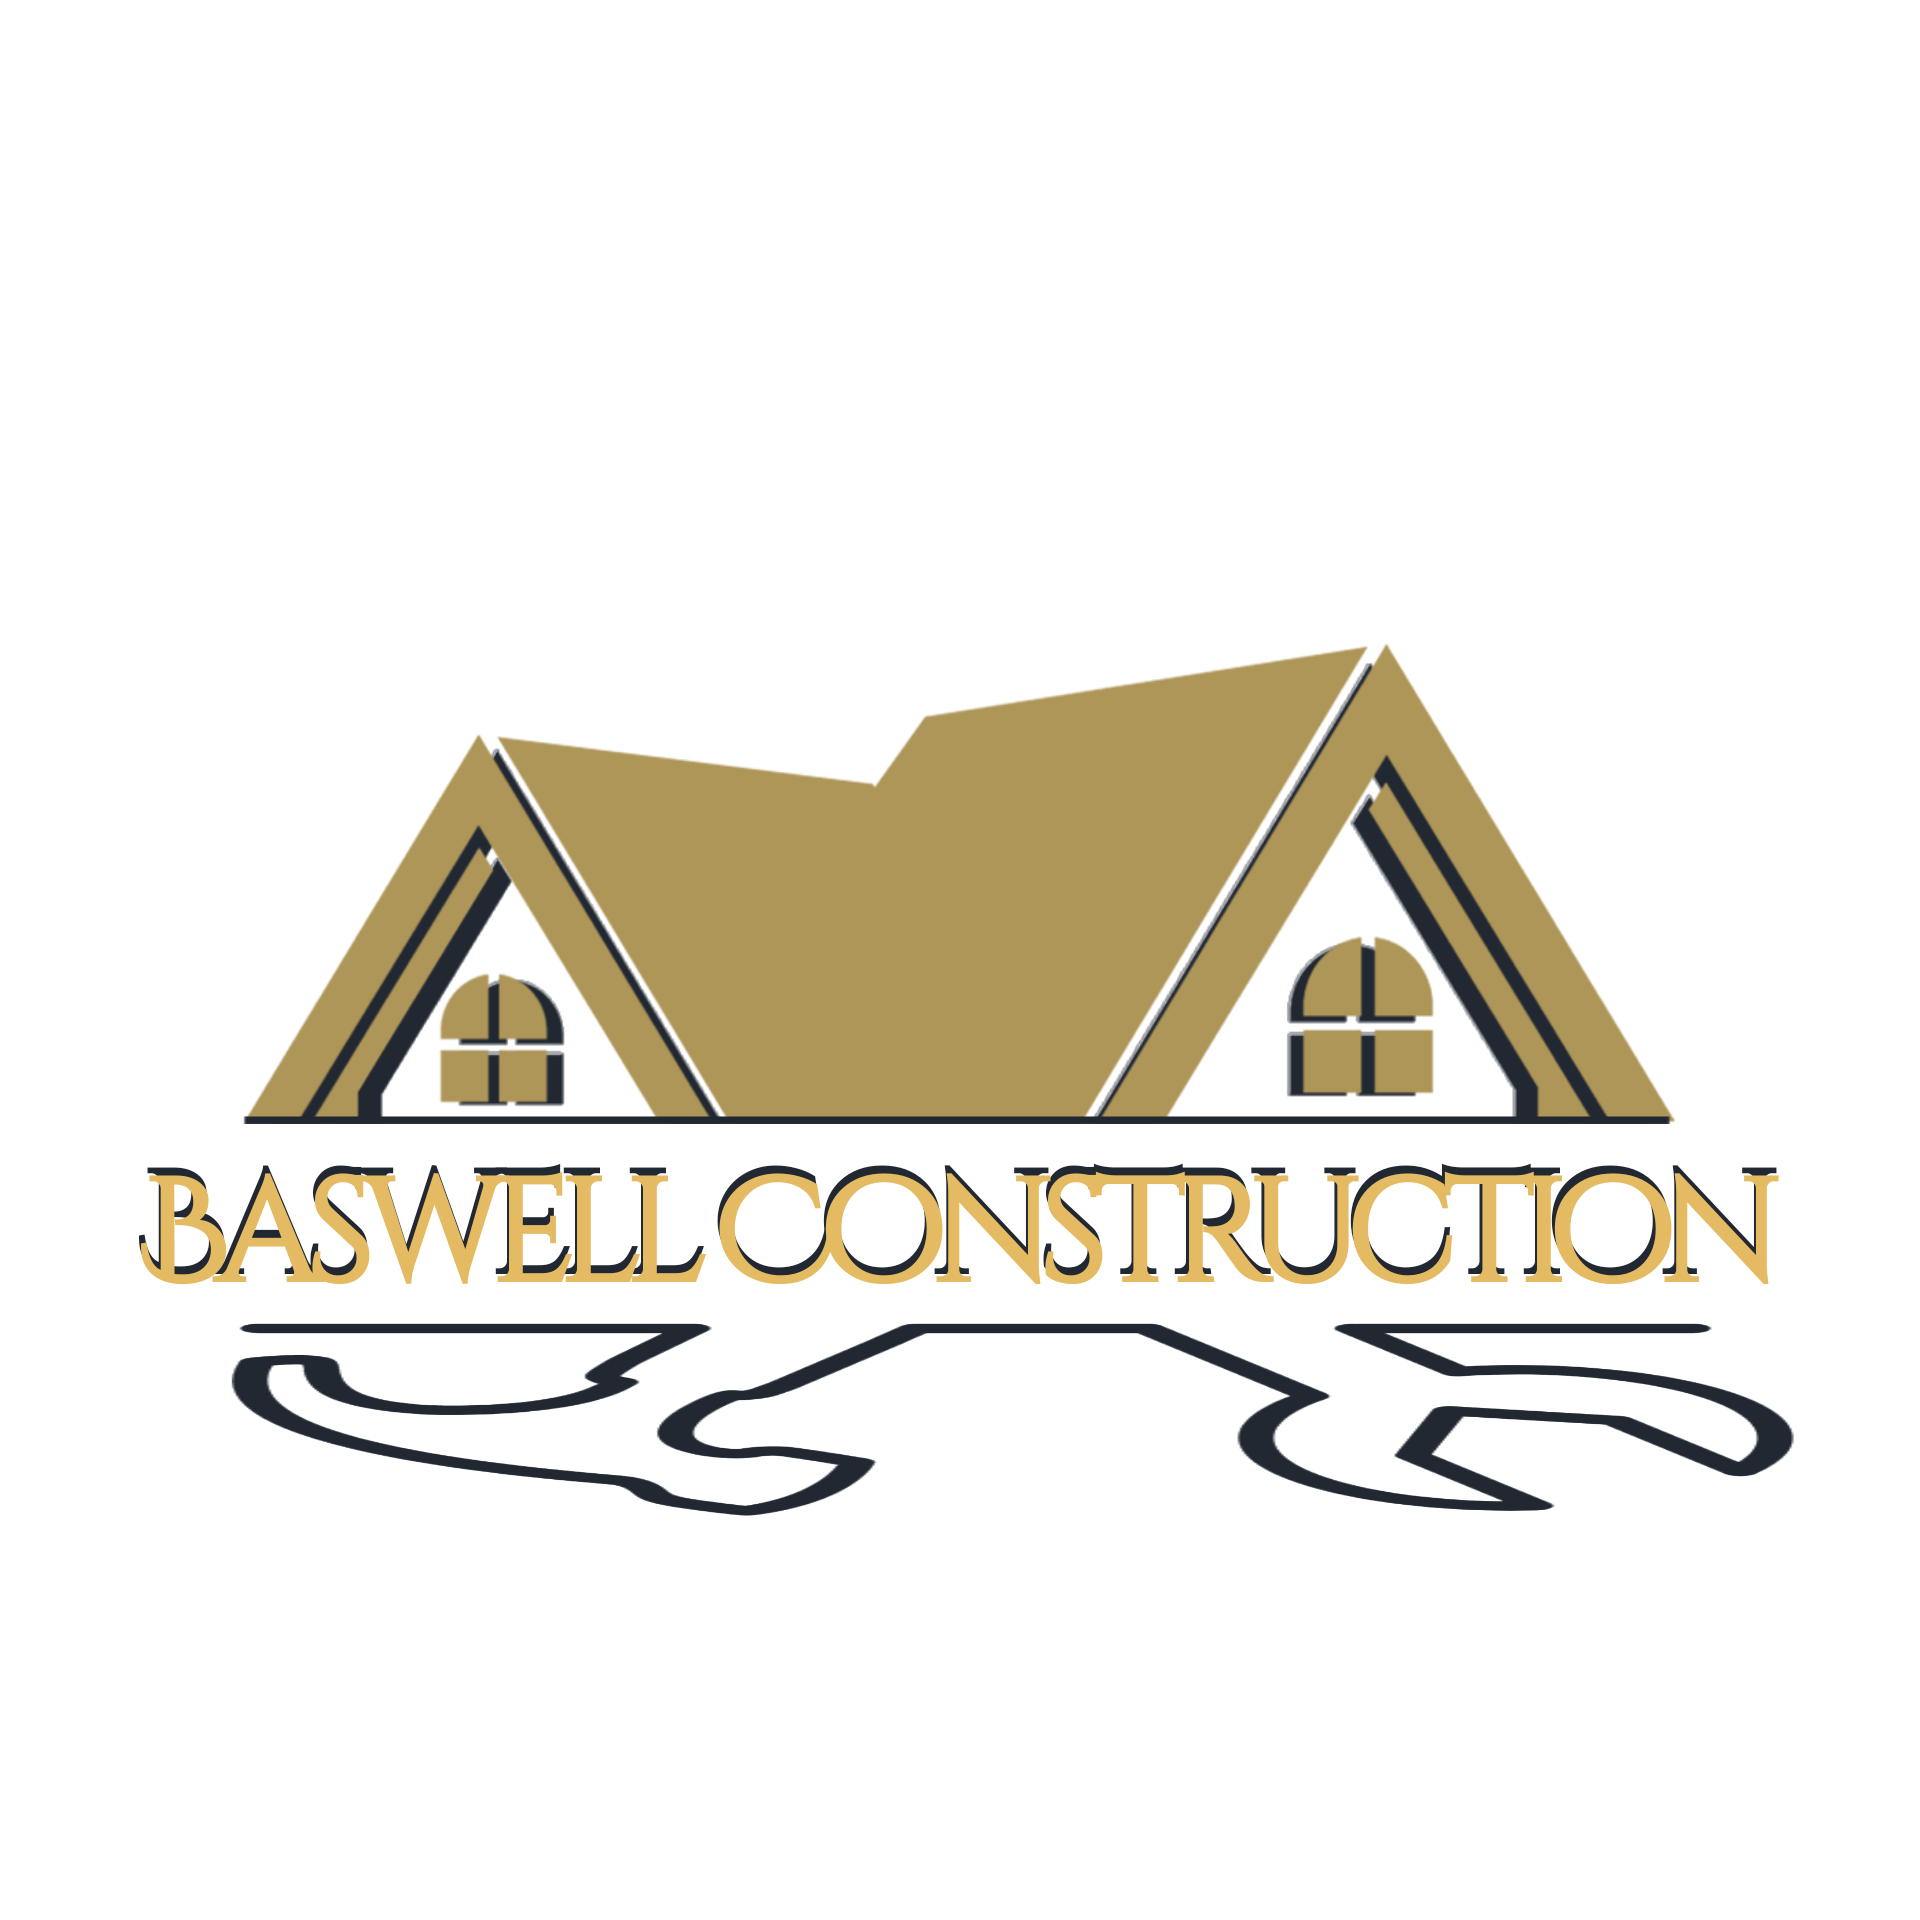 Baswell's Construction Logo